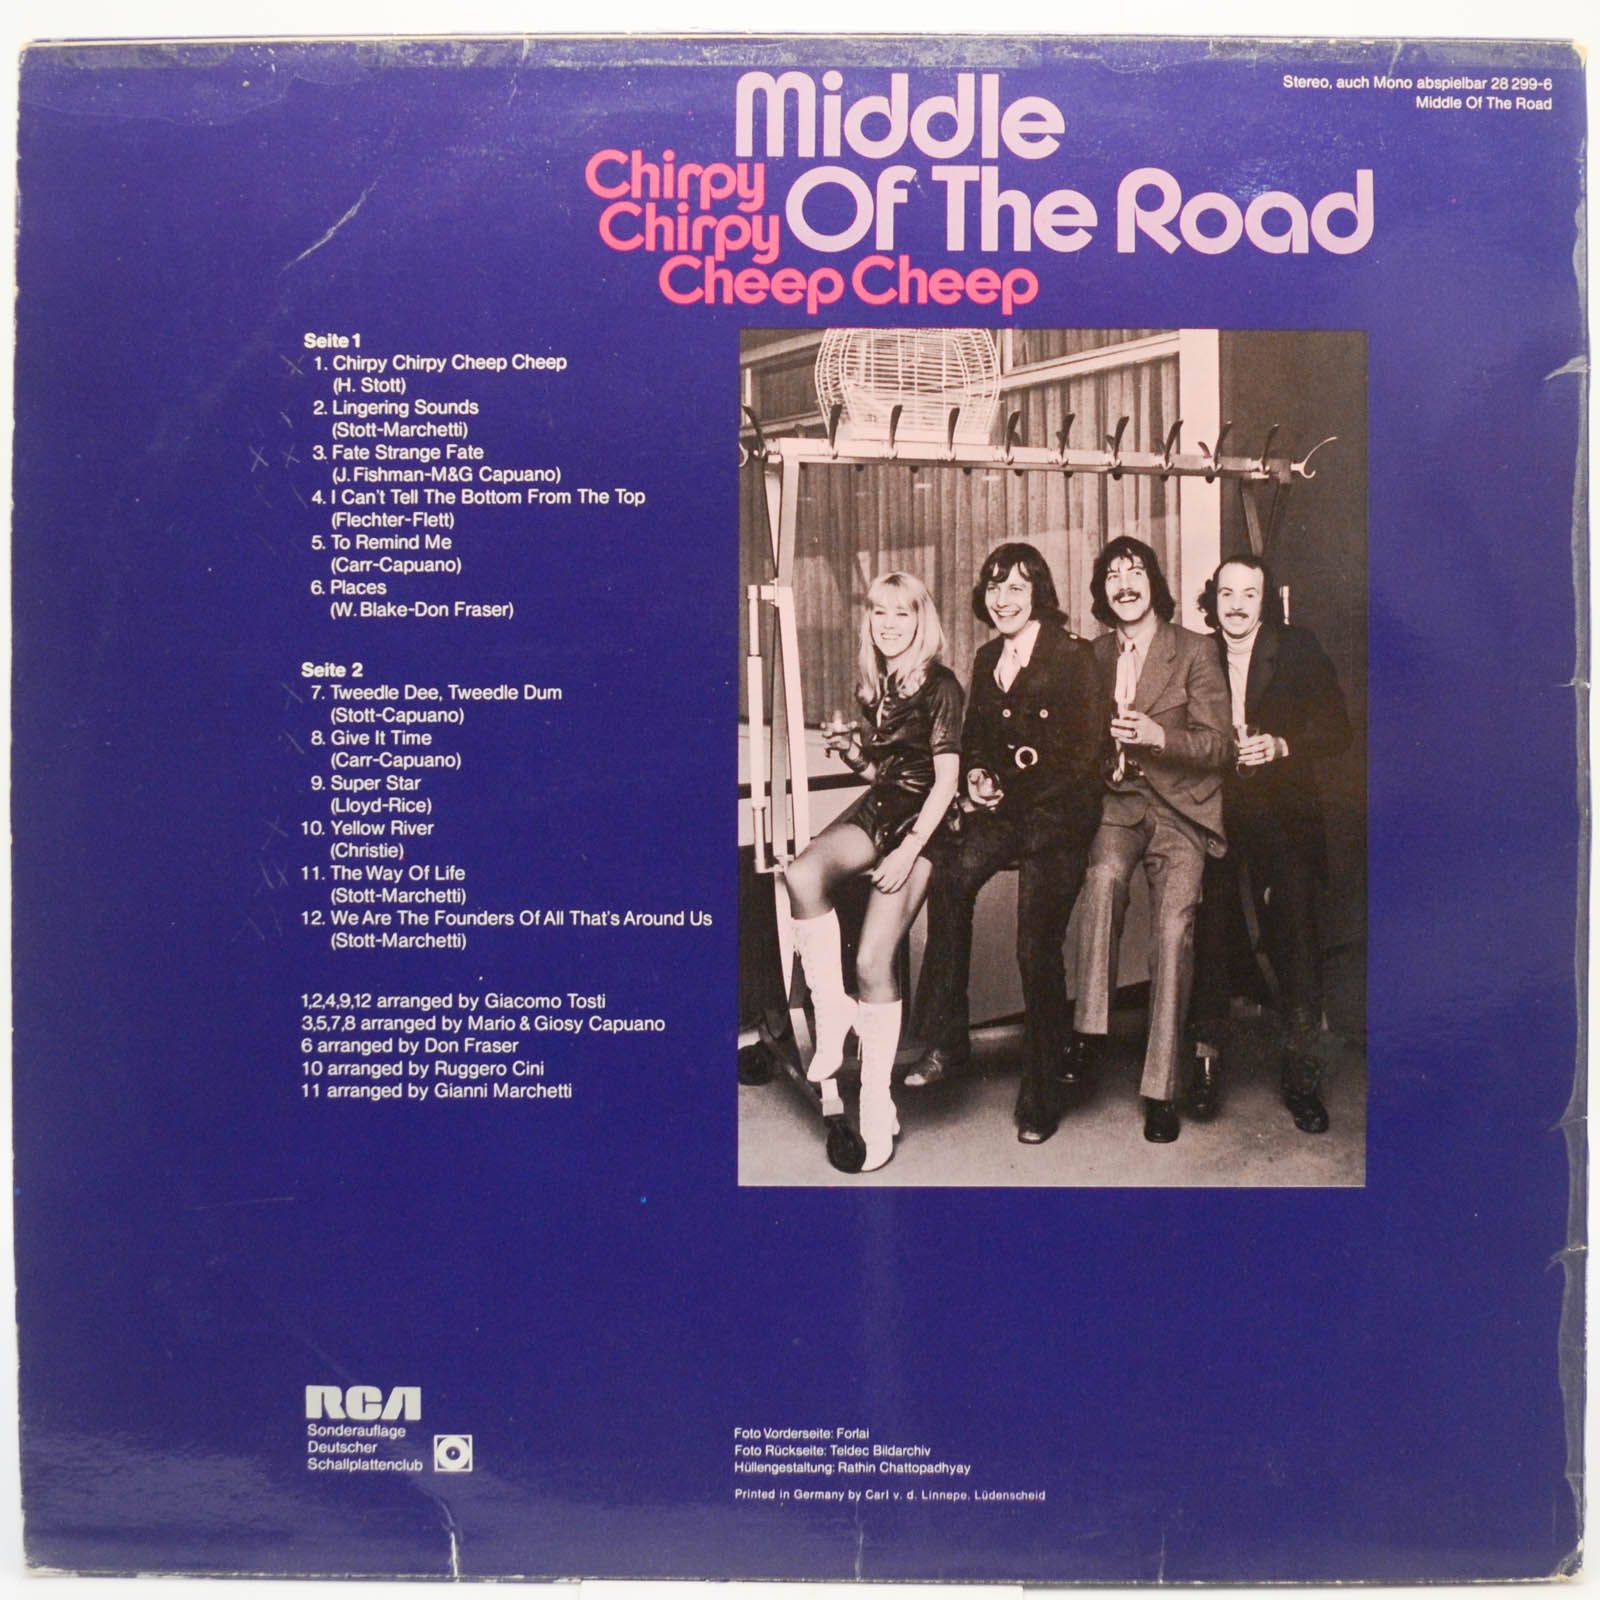 Middle Of The Road — Chirpy Chirpy Cheep Cheep, 1971